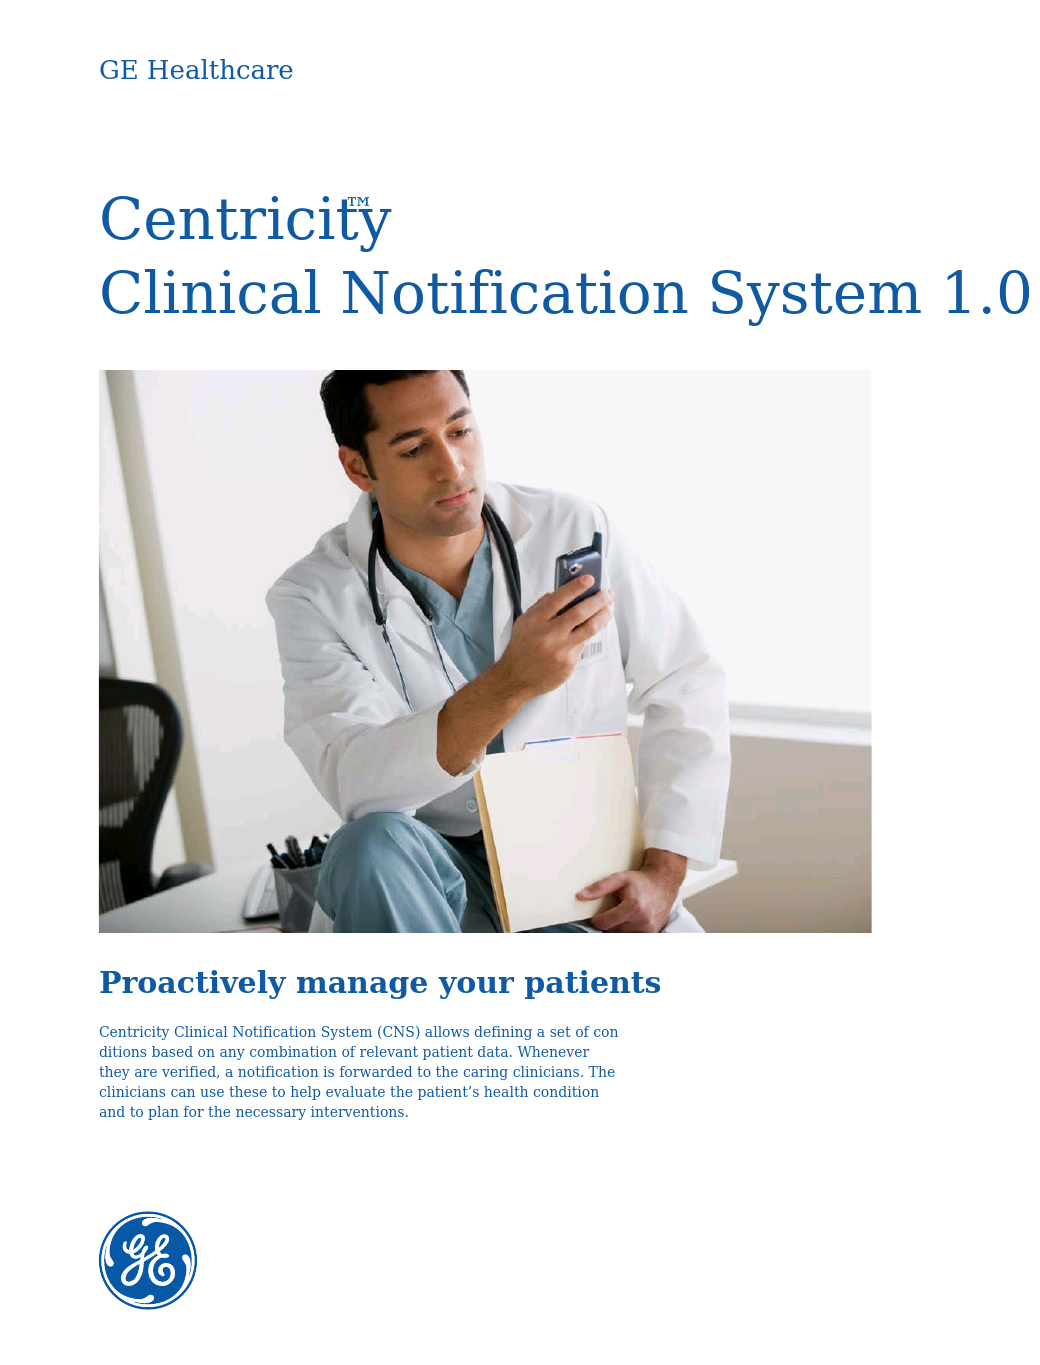 Centricity Clinical Notification System 1.0